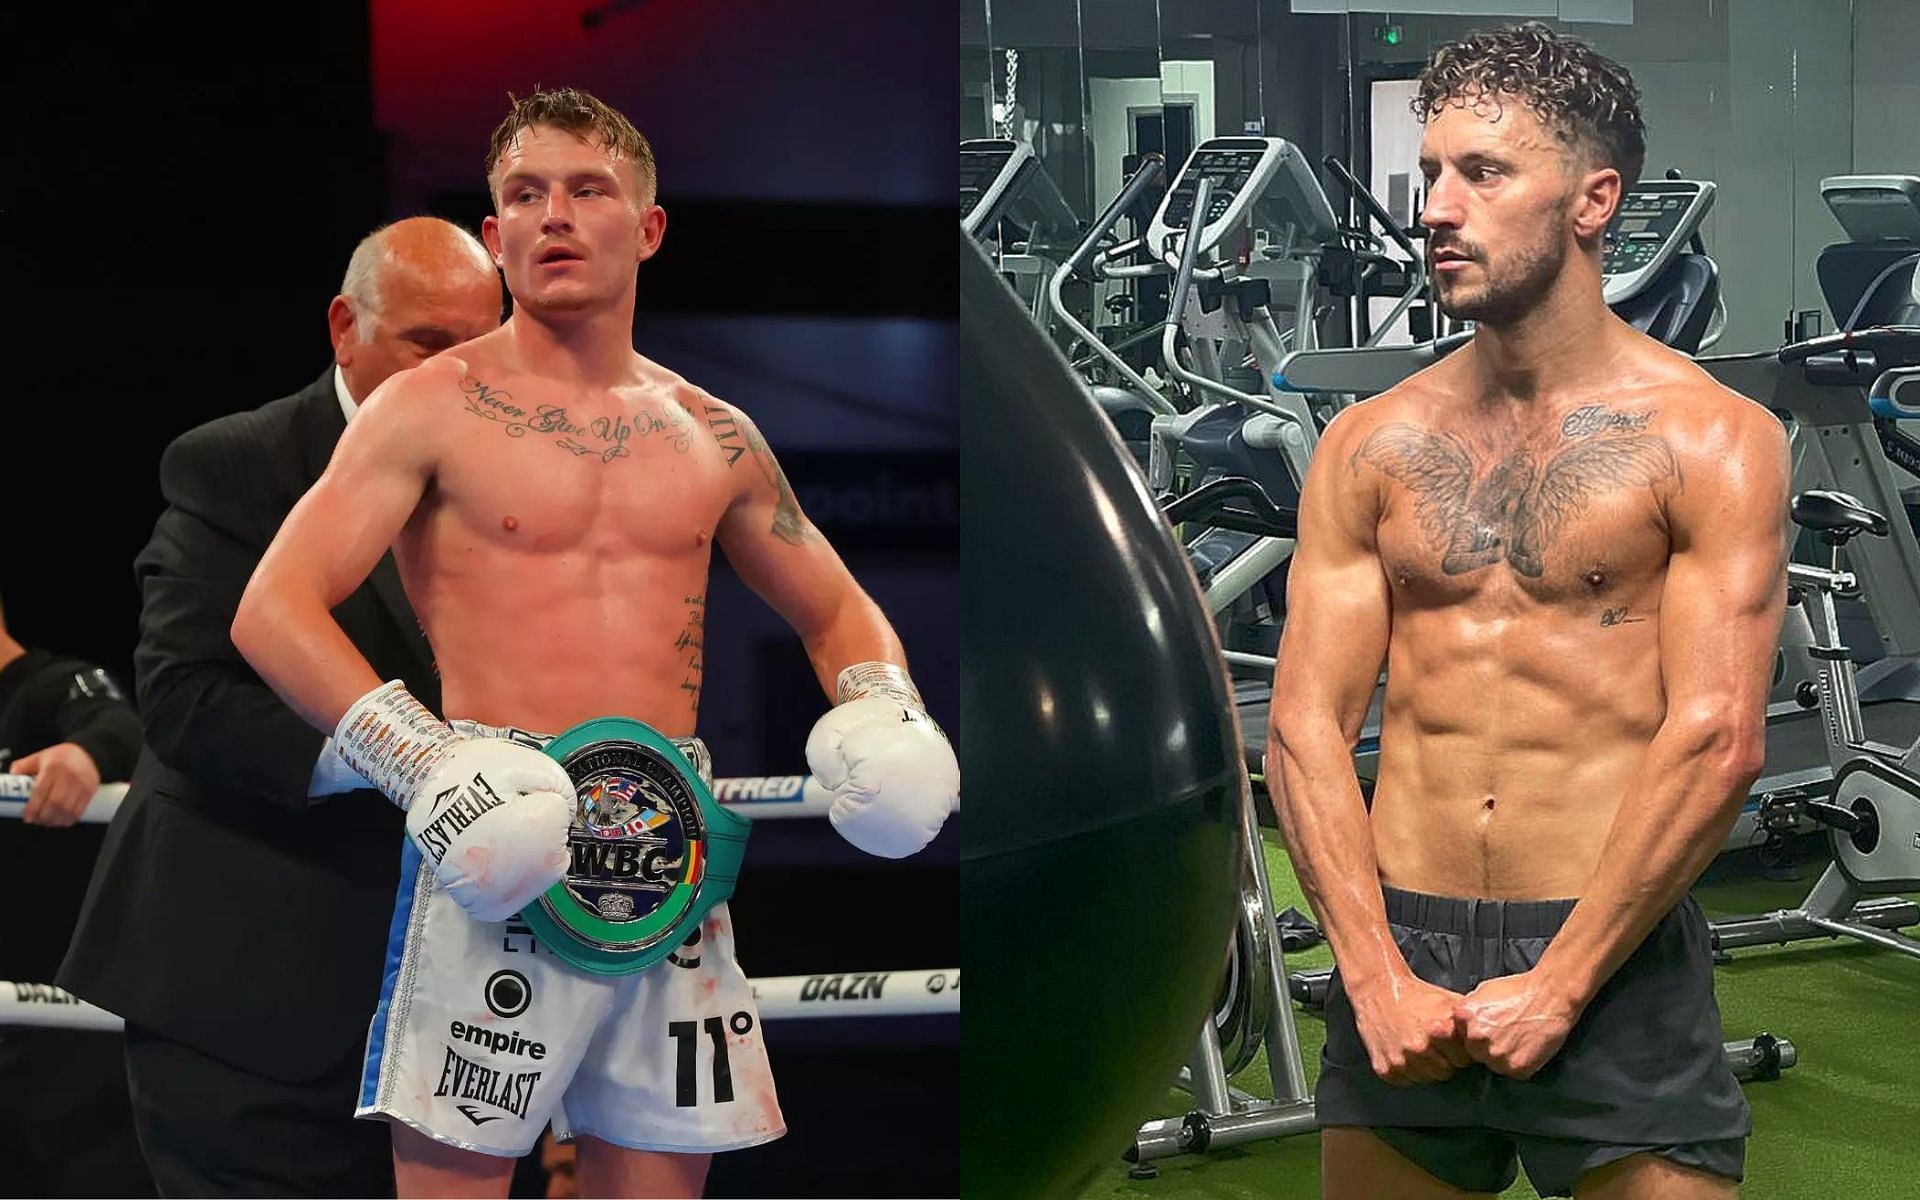 Dalton Smith (right) and Sam O&#039;maison (left) fights fro the vacant British Super Lightweight Title. (Photos from Getty Images and @SamTheSensation Twitter)